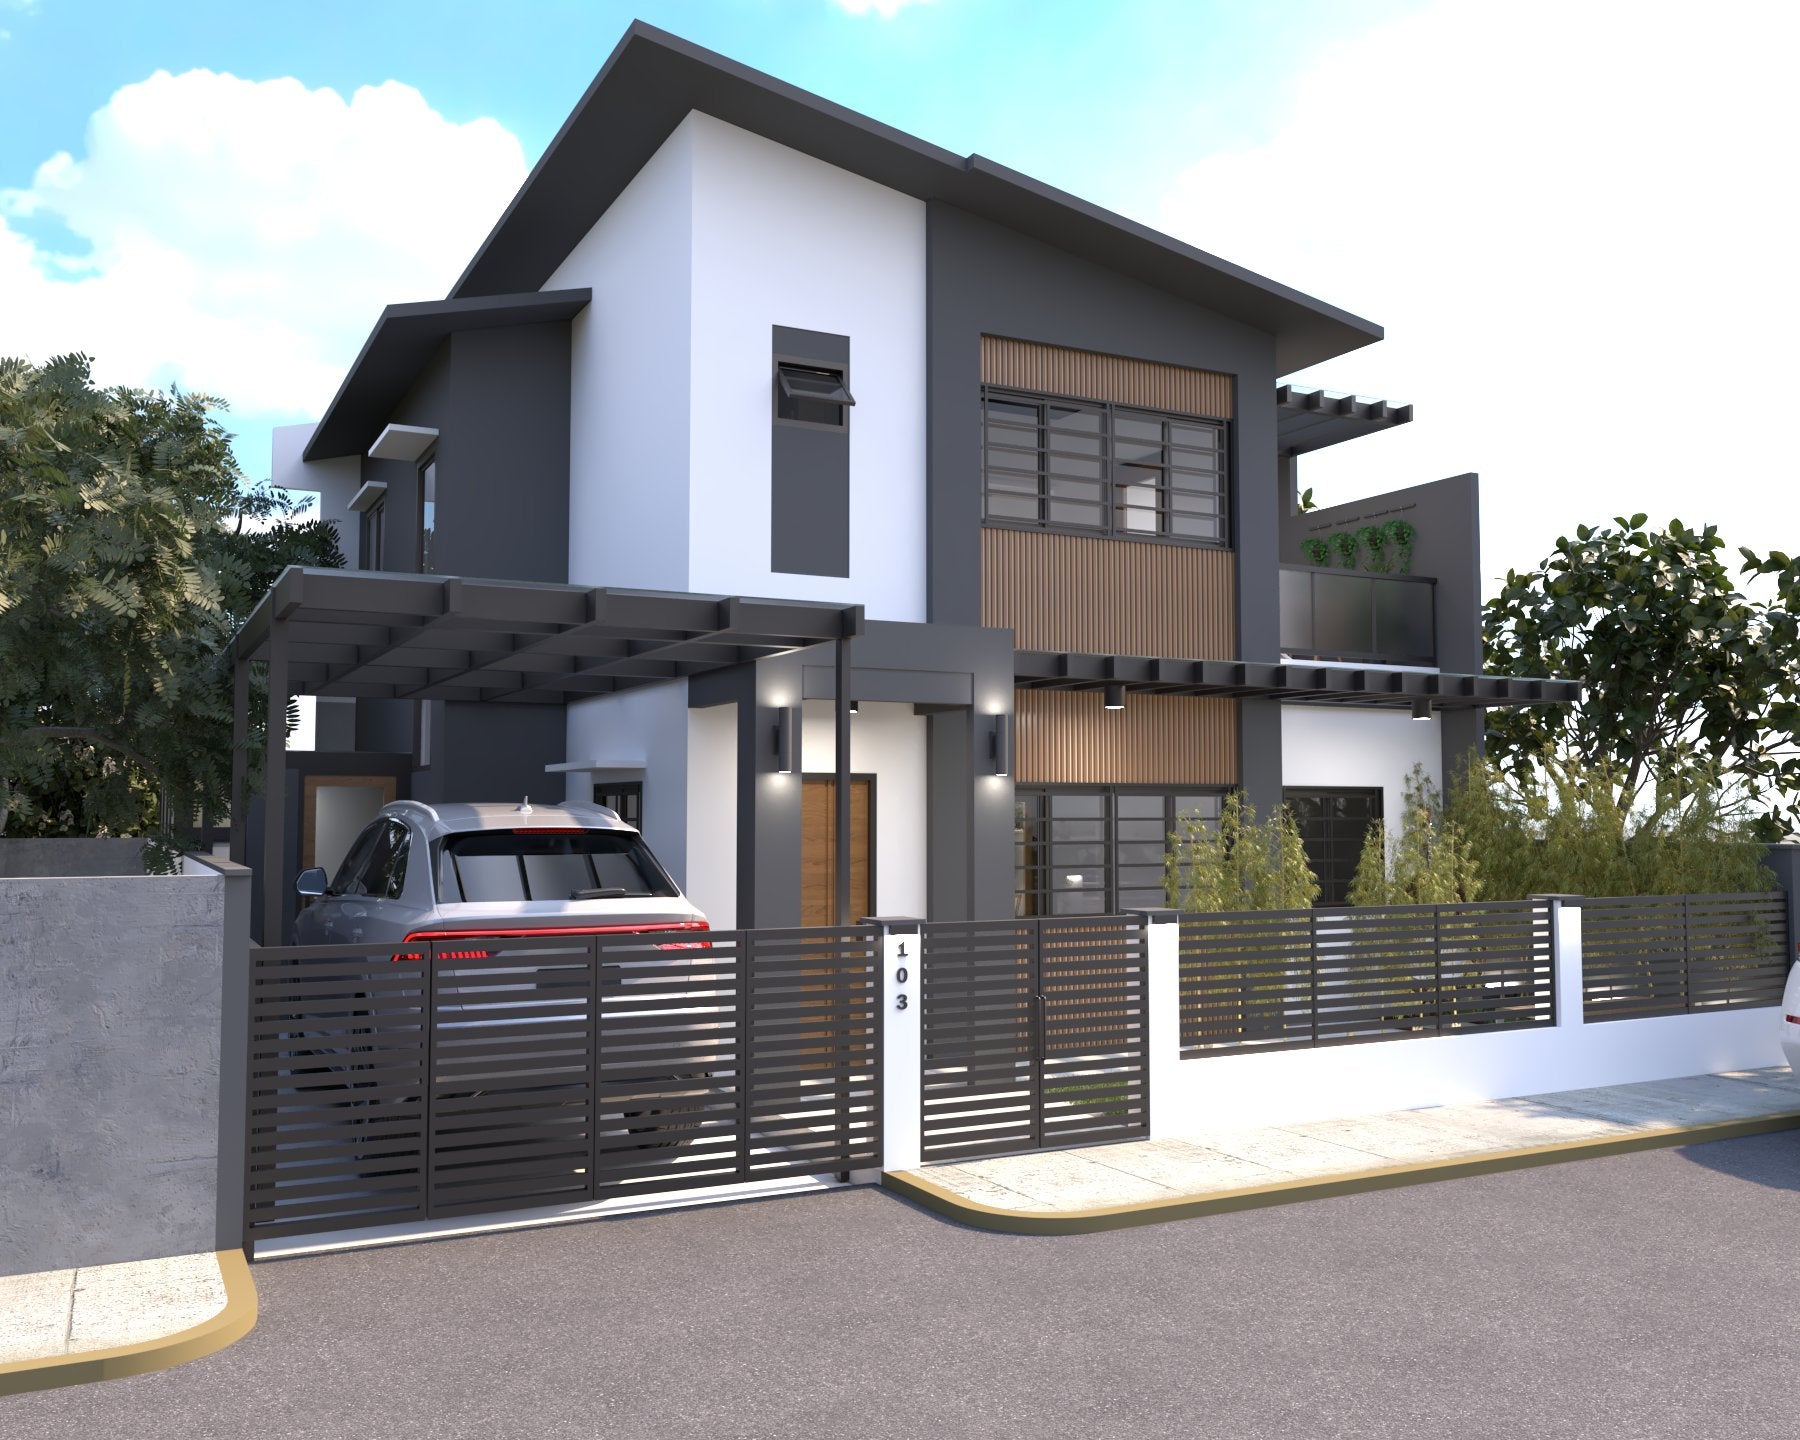 Exterior house renovation in The Tropics 4 by Filinvest Cainta Rizal with black metal fence